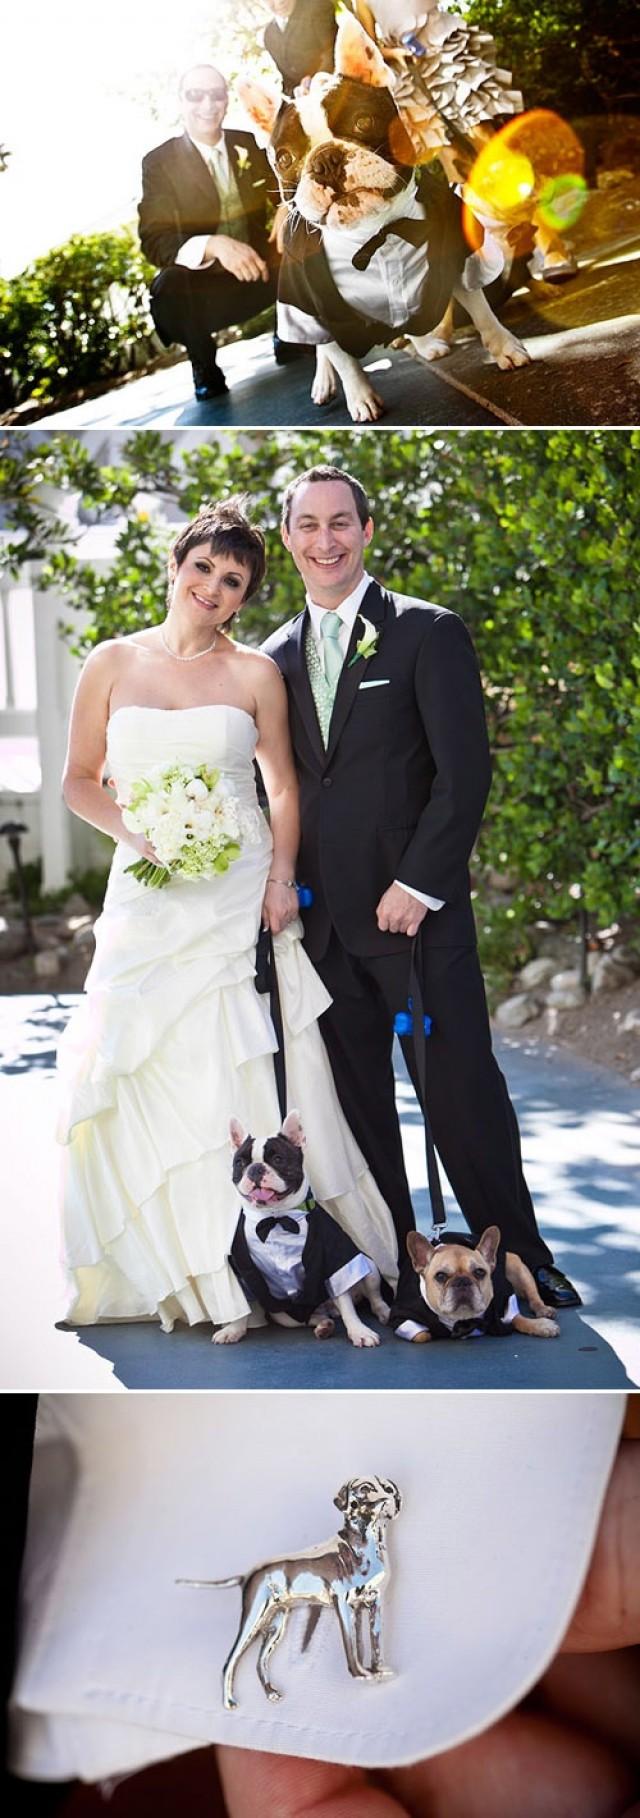 How To Include Your Dog In Your Wedding Day